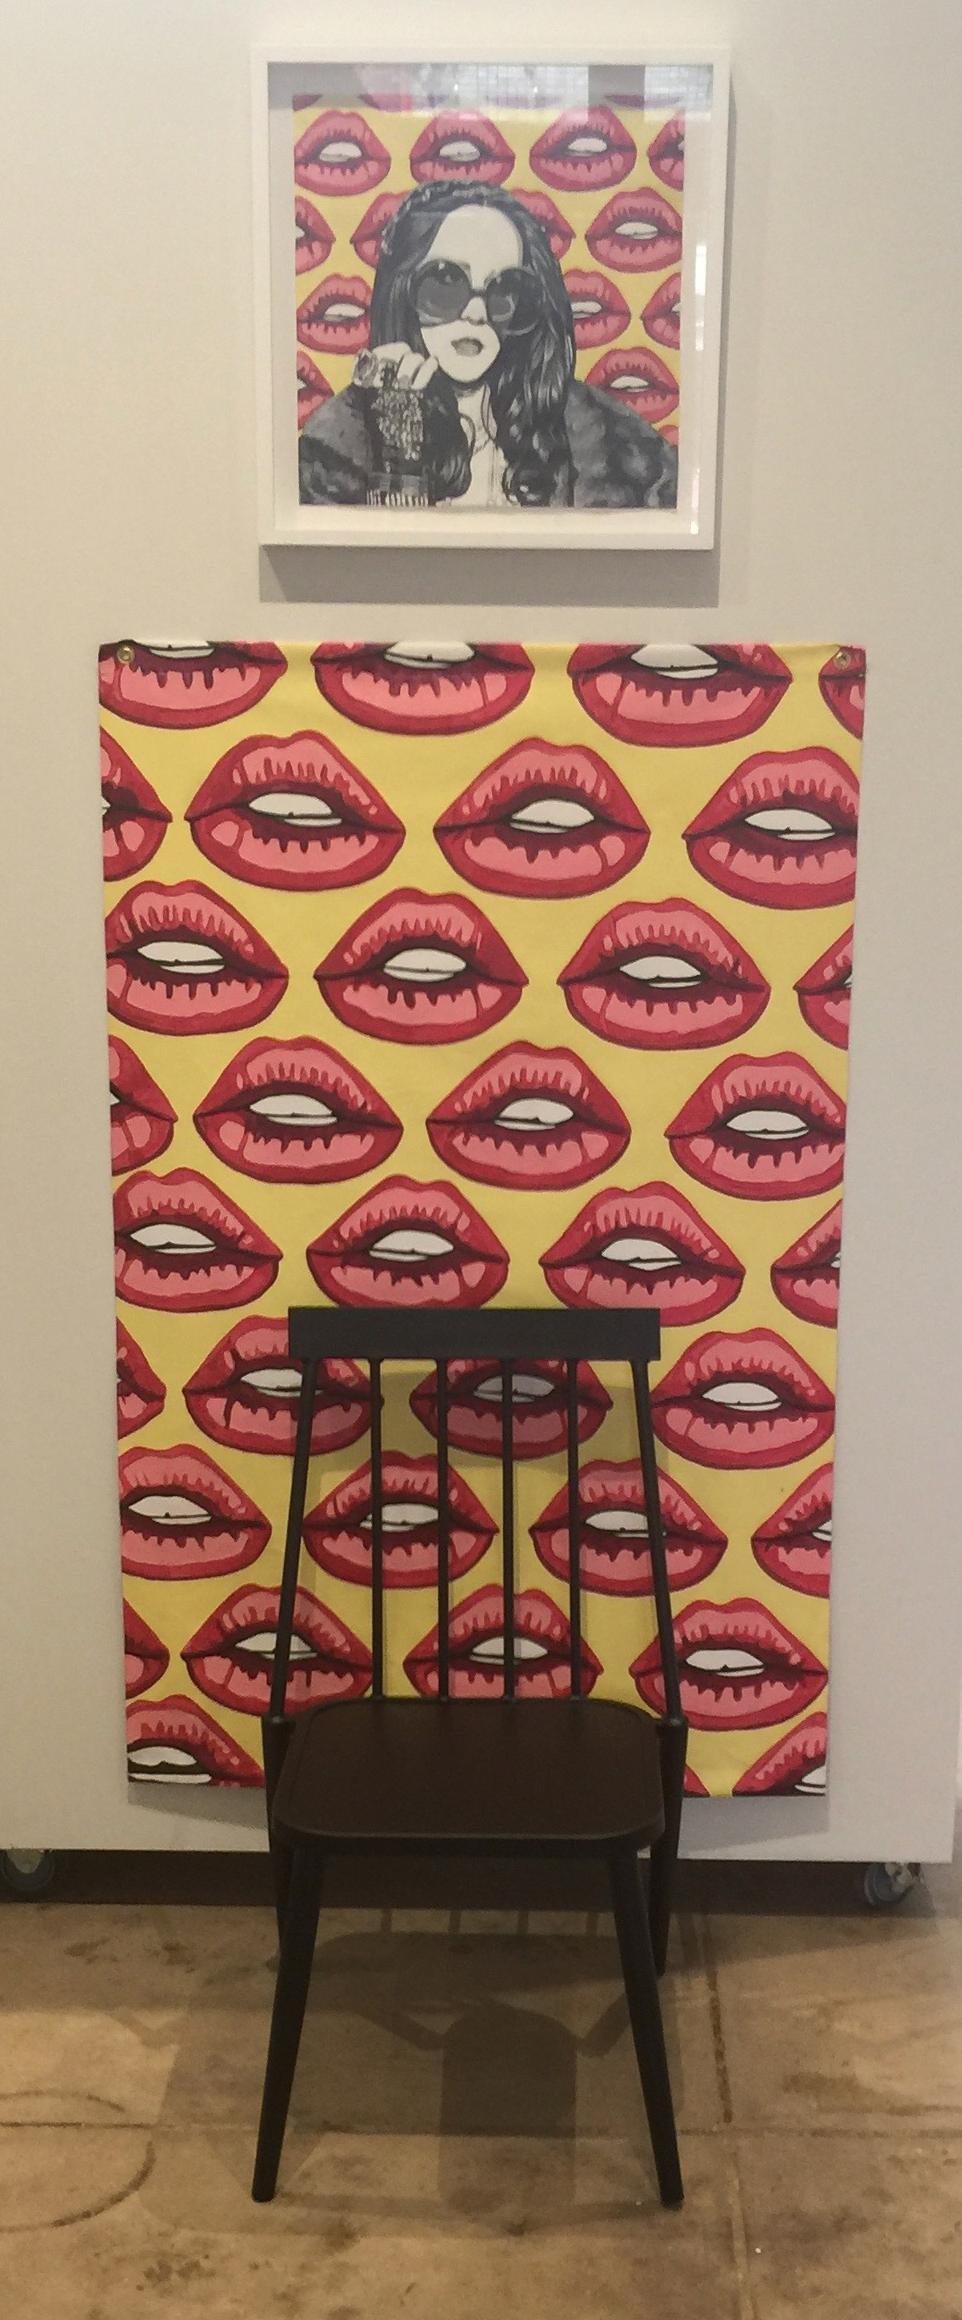 #CourtneyForever - Lips by Courtney Miles
Acrylic on canvas. 
84 x 36 x 1.75 in
This work includes the selfie canvas, (which is easily hung via 2 grommets) as well as the 24 x 24 x 2" framed acrylic on canvas painting of Courtney with the same